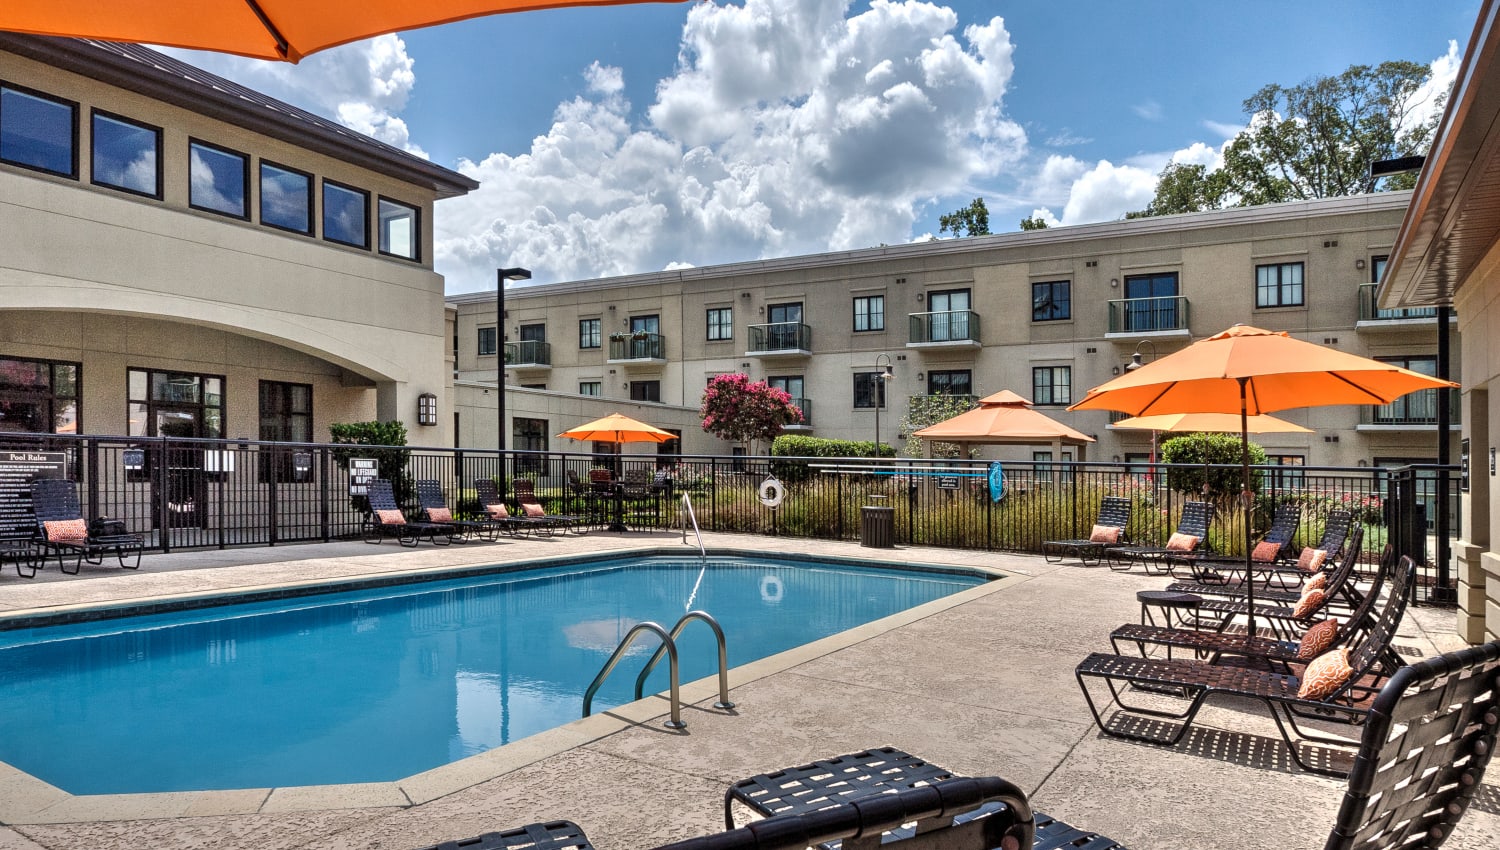 Sparkling swimming pool surrounded by lounge chairs and tables with umbrellas at SouthPark Morrison in Charlotte, North Carolina